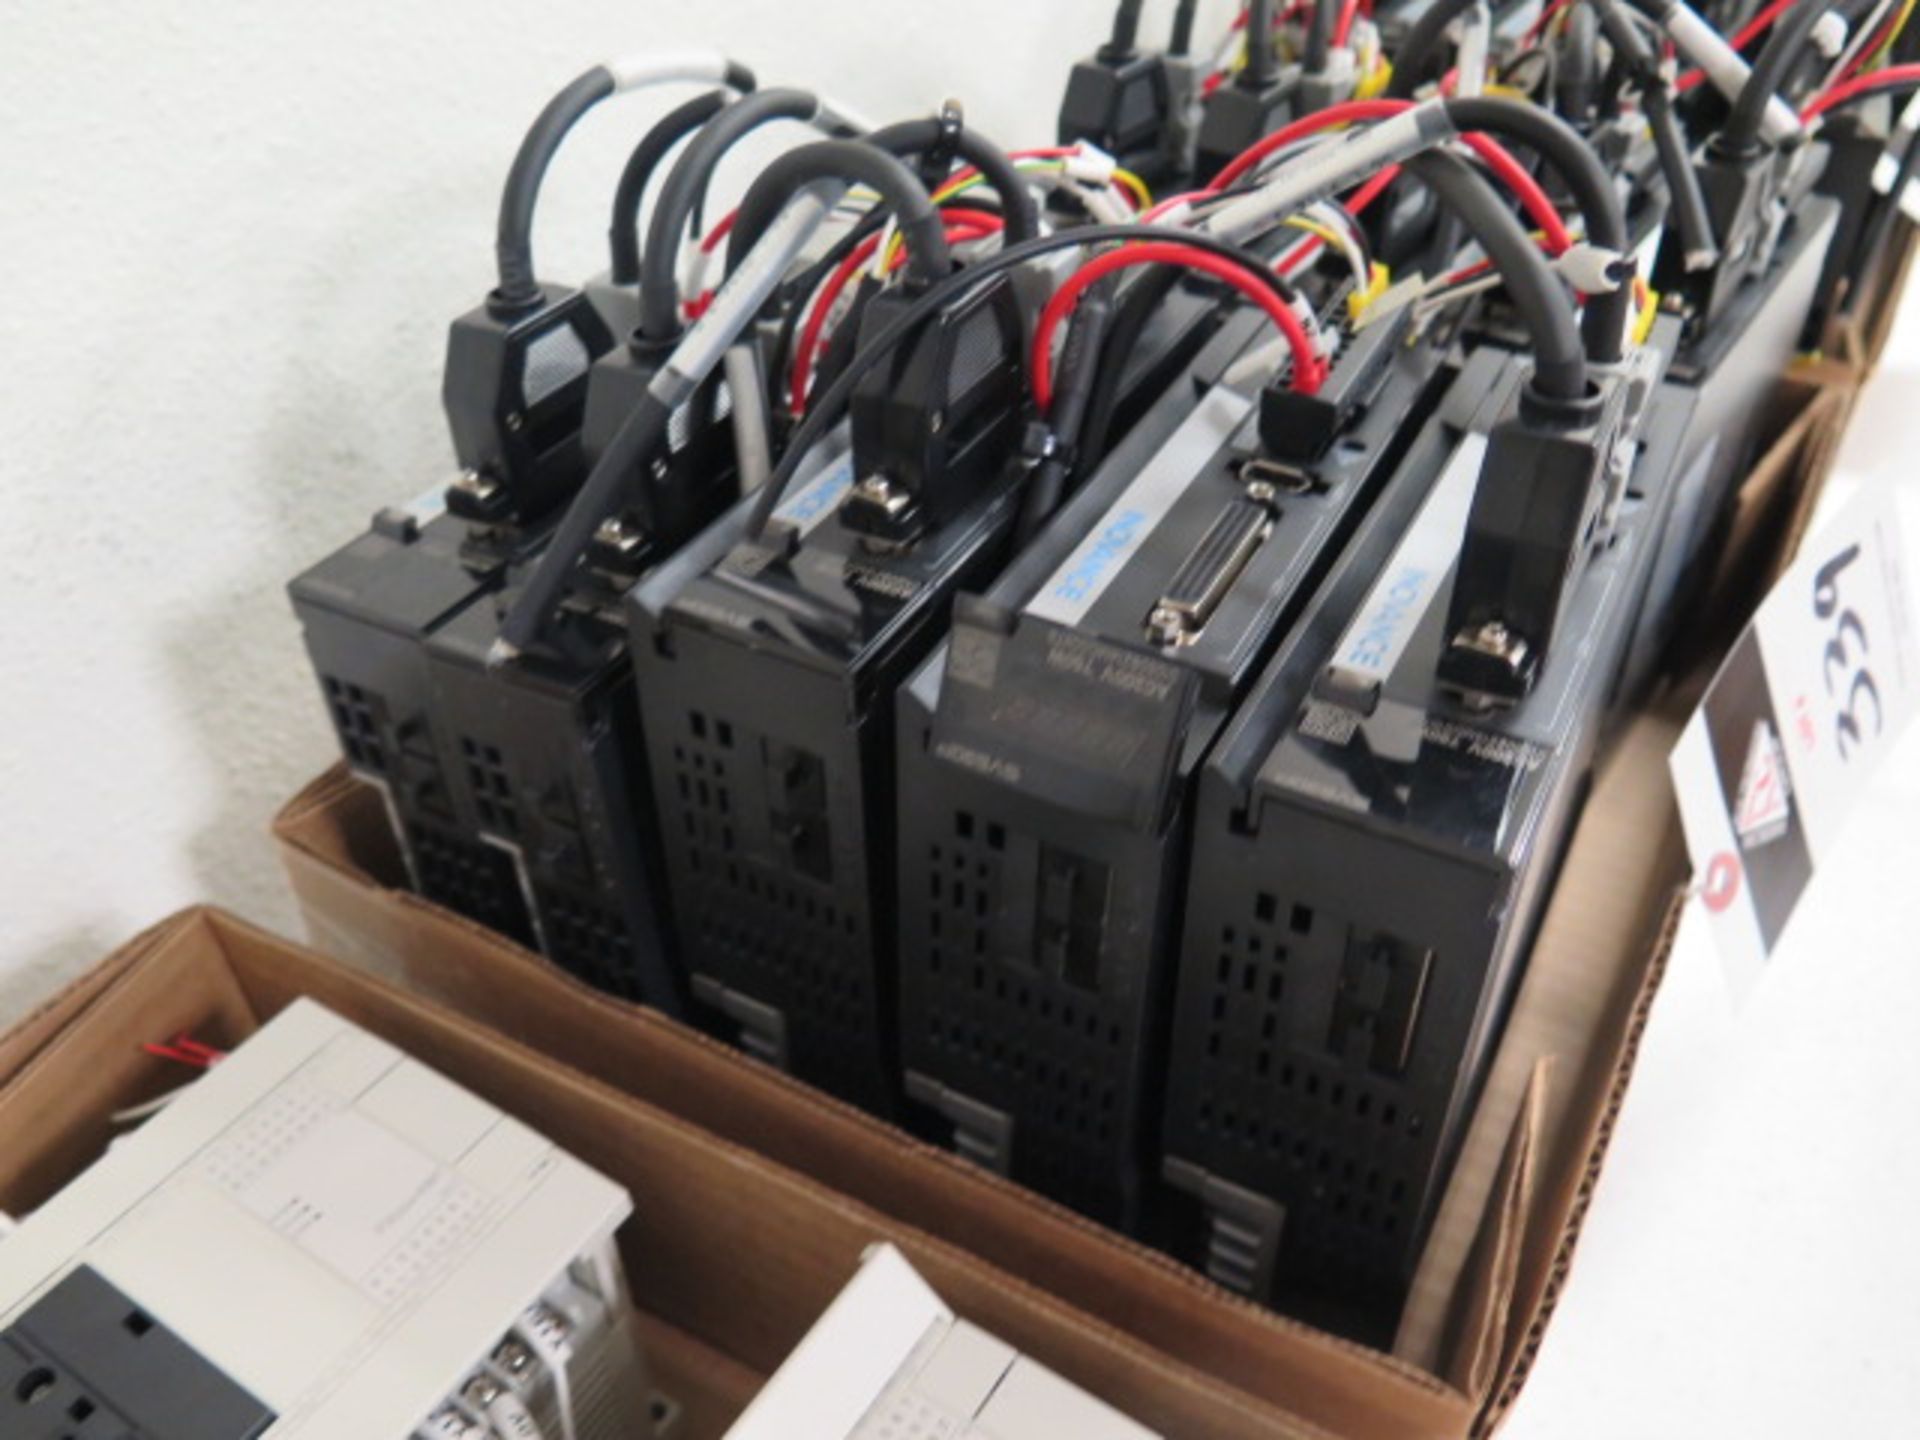 Suzhou Inovance mdl. SV630PS5R51 AC200V 750W Unite (3) and (7) SV630PS2R81 AC200V 400W Units (SOLD A - Image 3 of 7